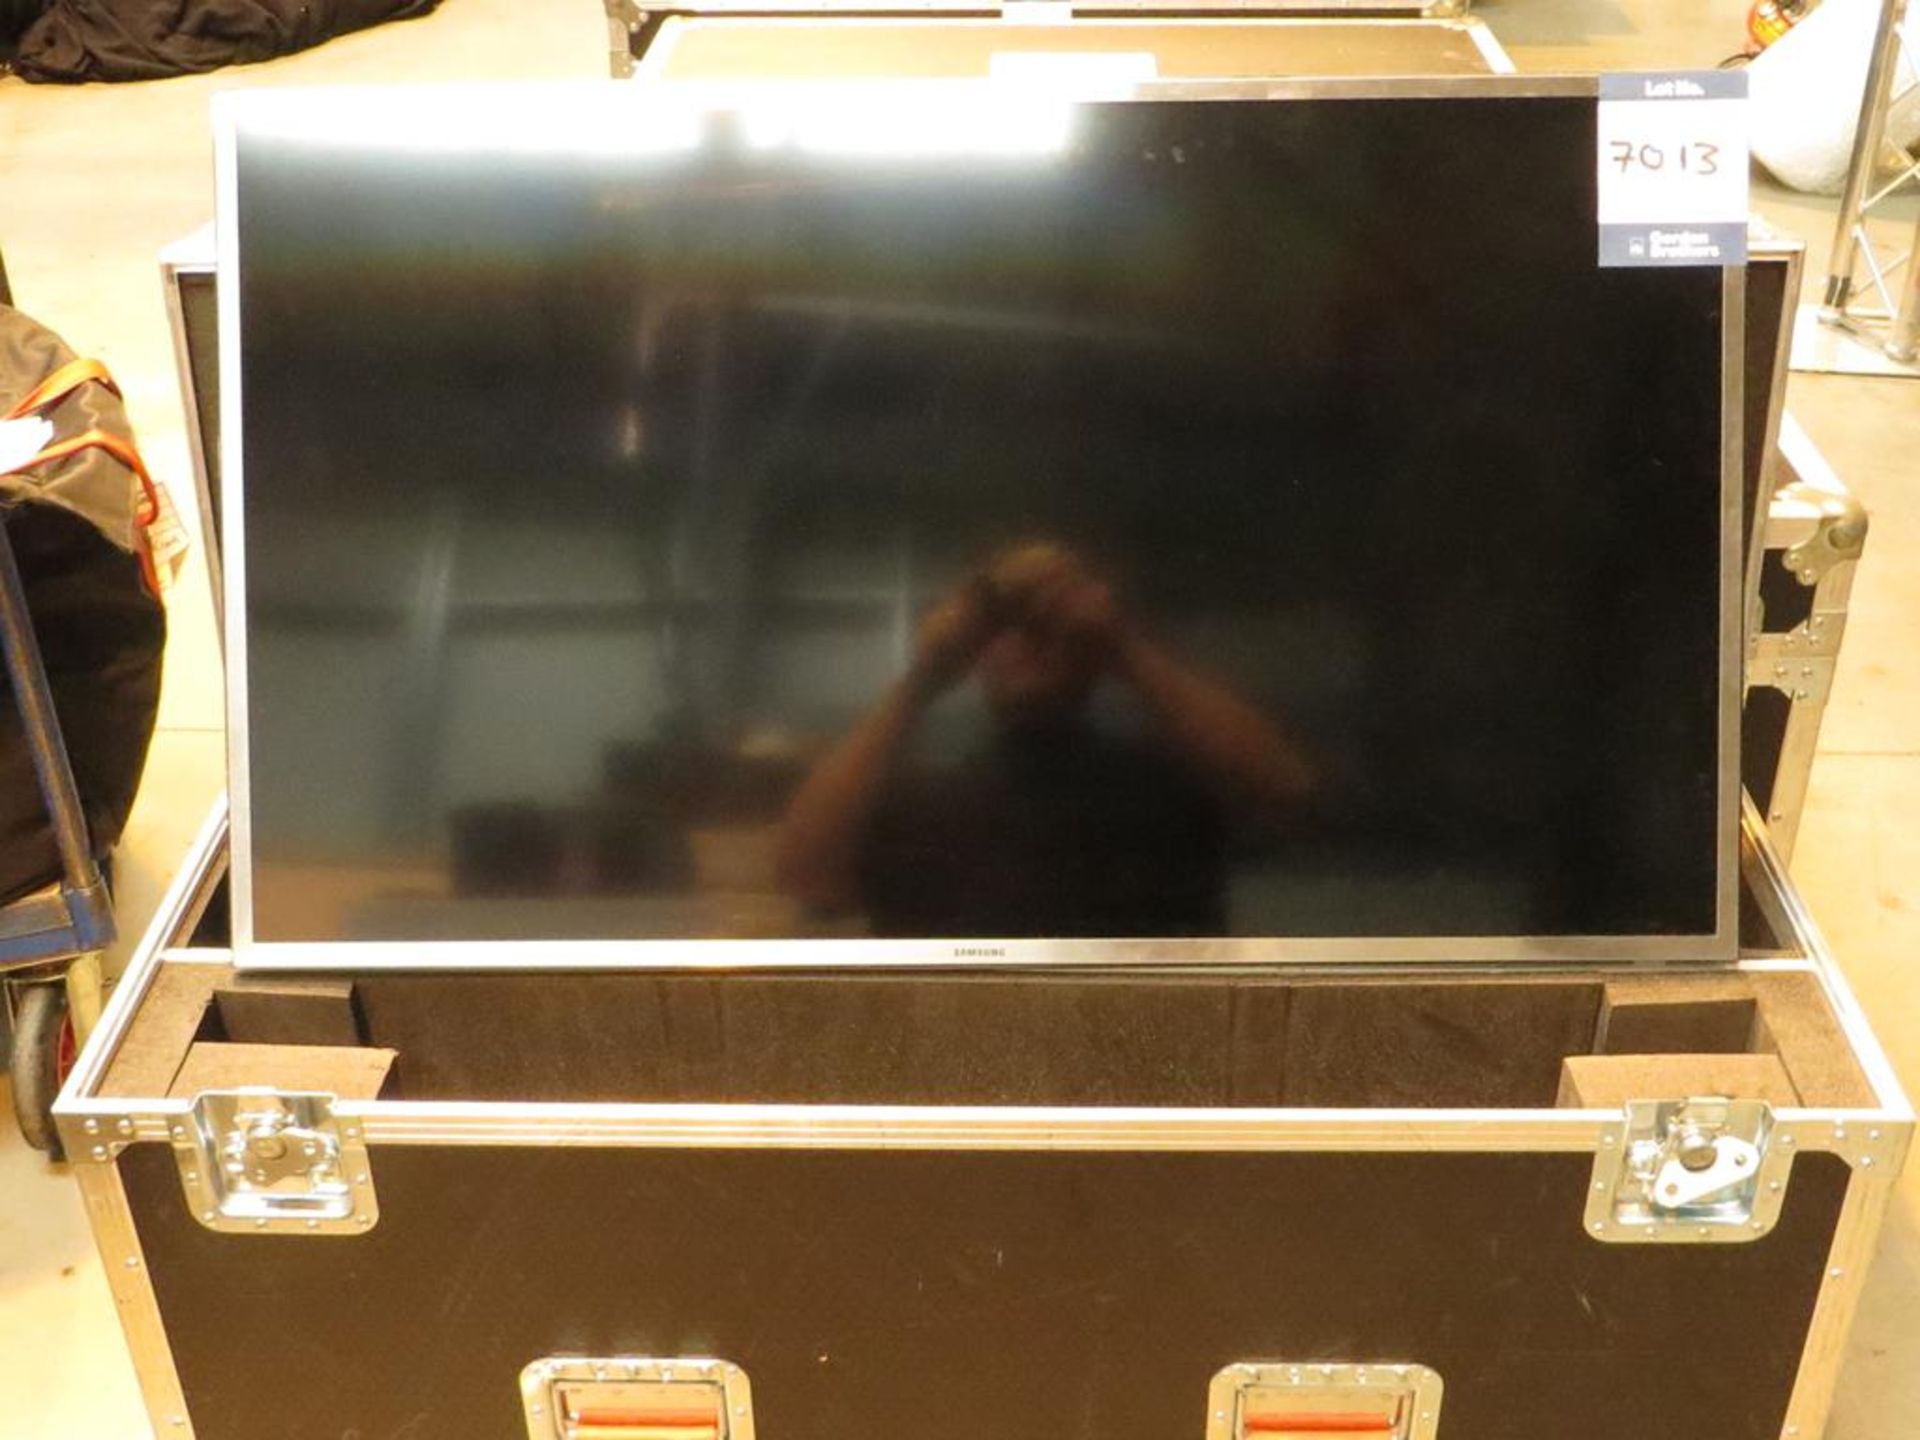 Samsung, 46" LED monitor, Model VE46F6200AM with remote control and Unicol mount in transit case: - Image 2 of 3